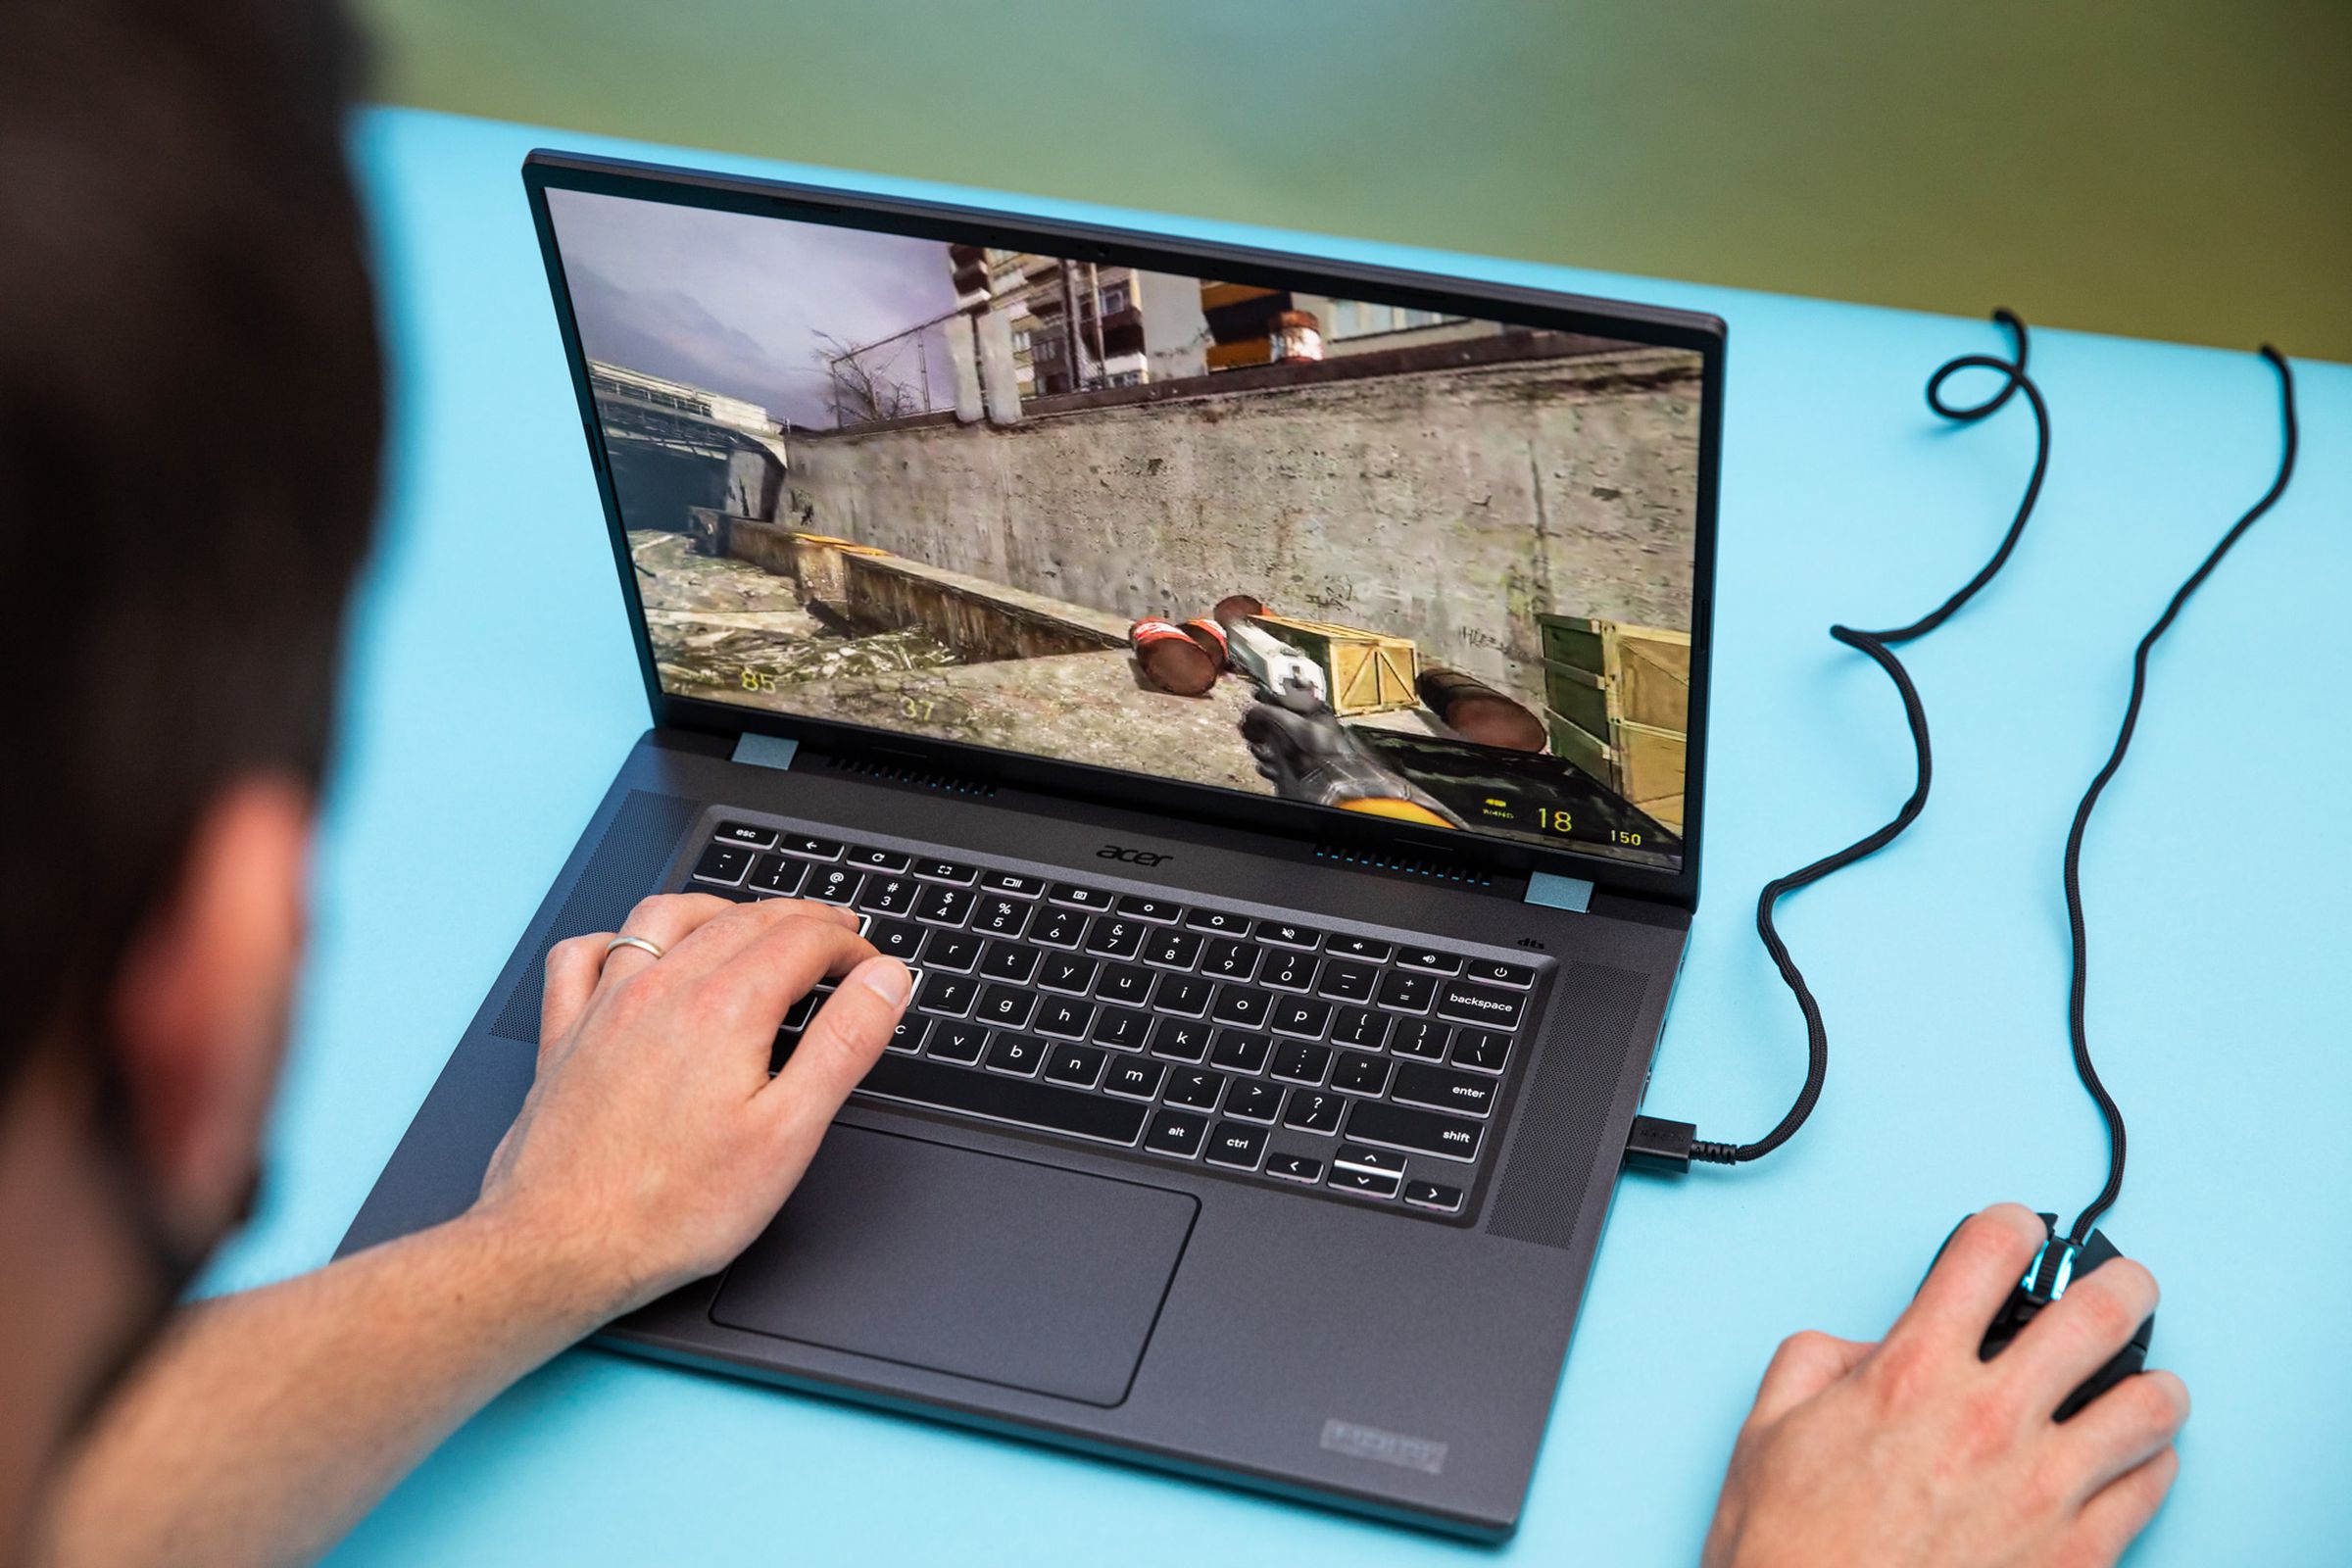 The Acer Chromebook 516 GE gaming laptop with a mouse plugged into its USB port. It’s running the game Half-Life 2.